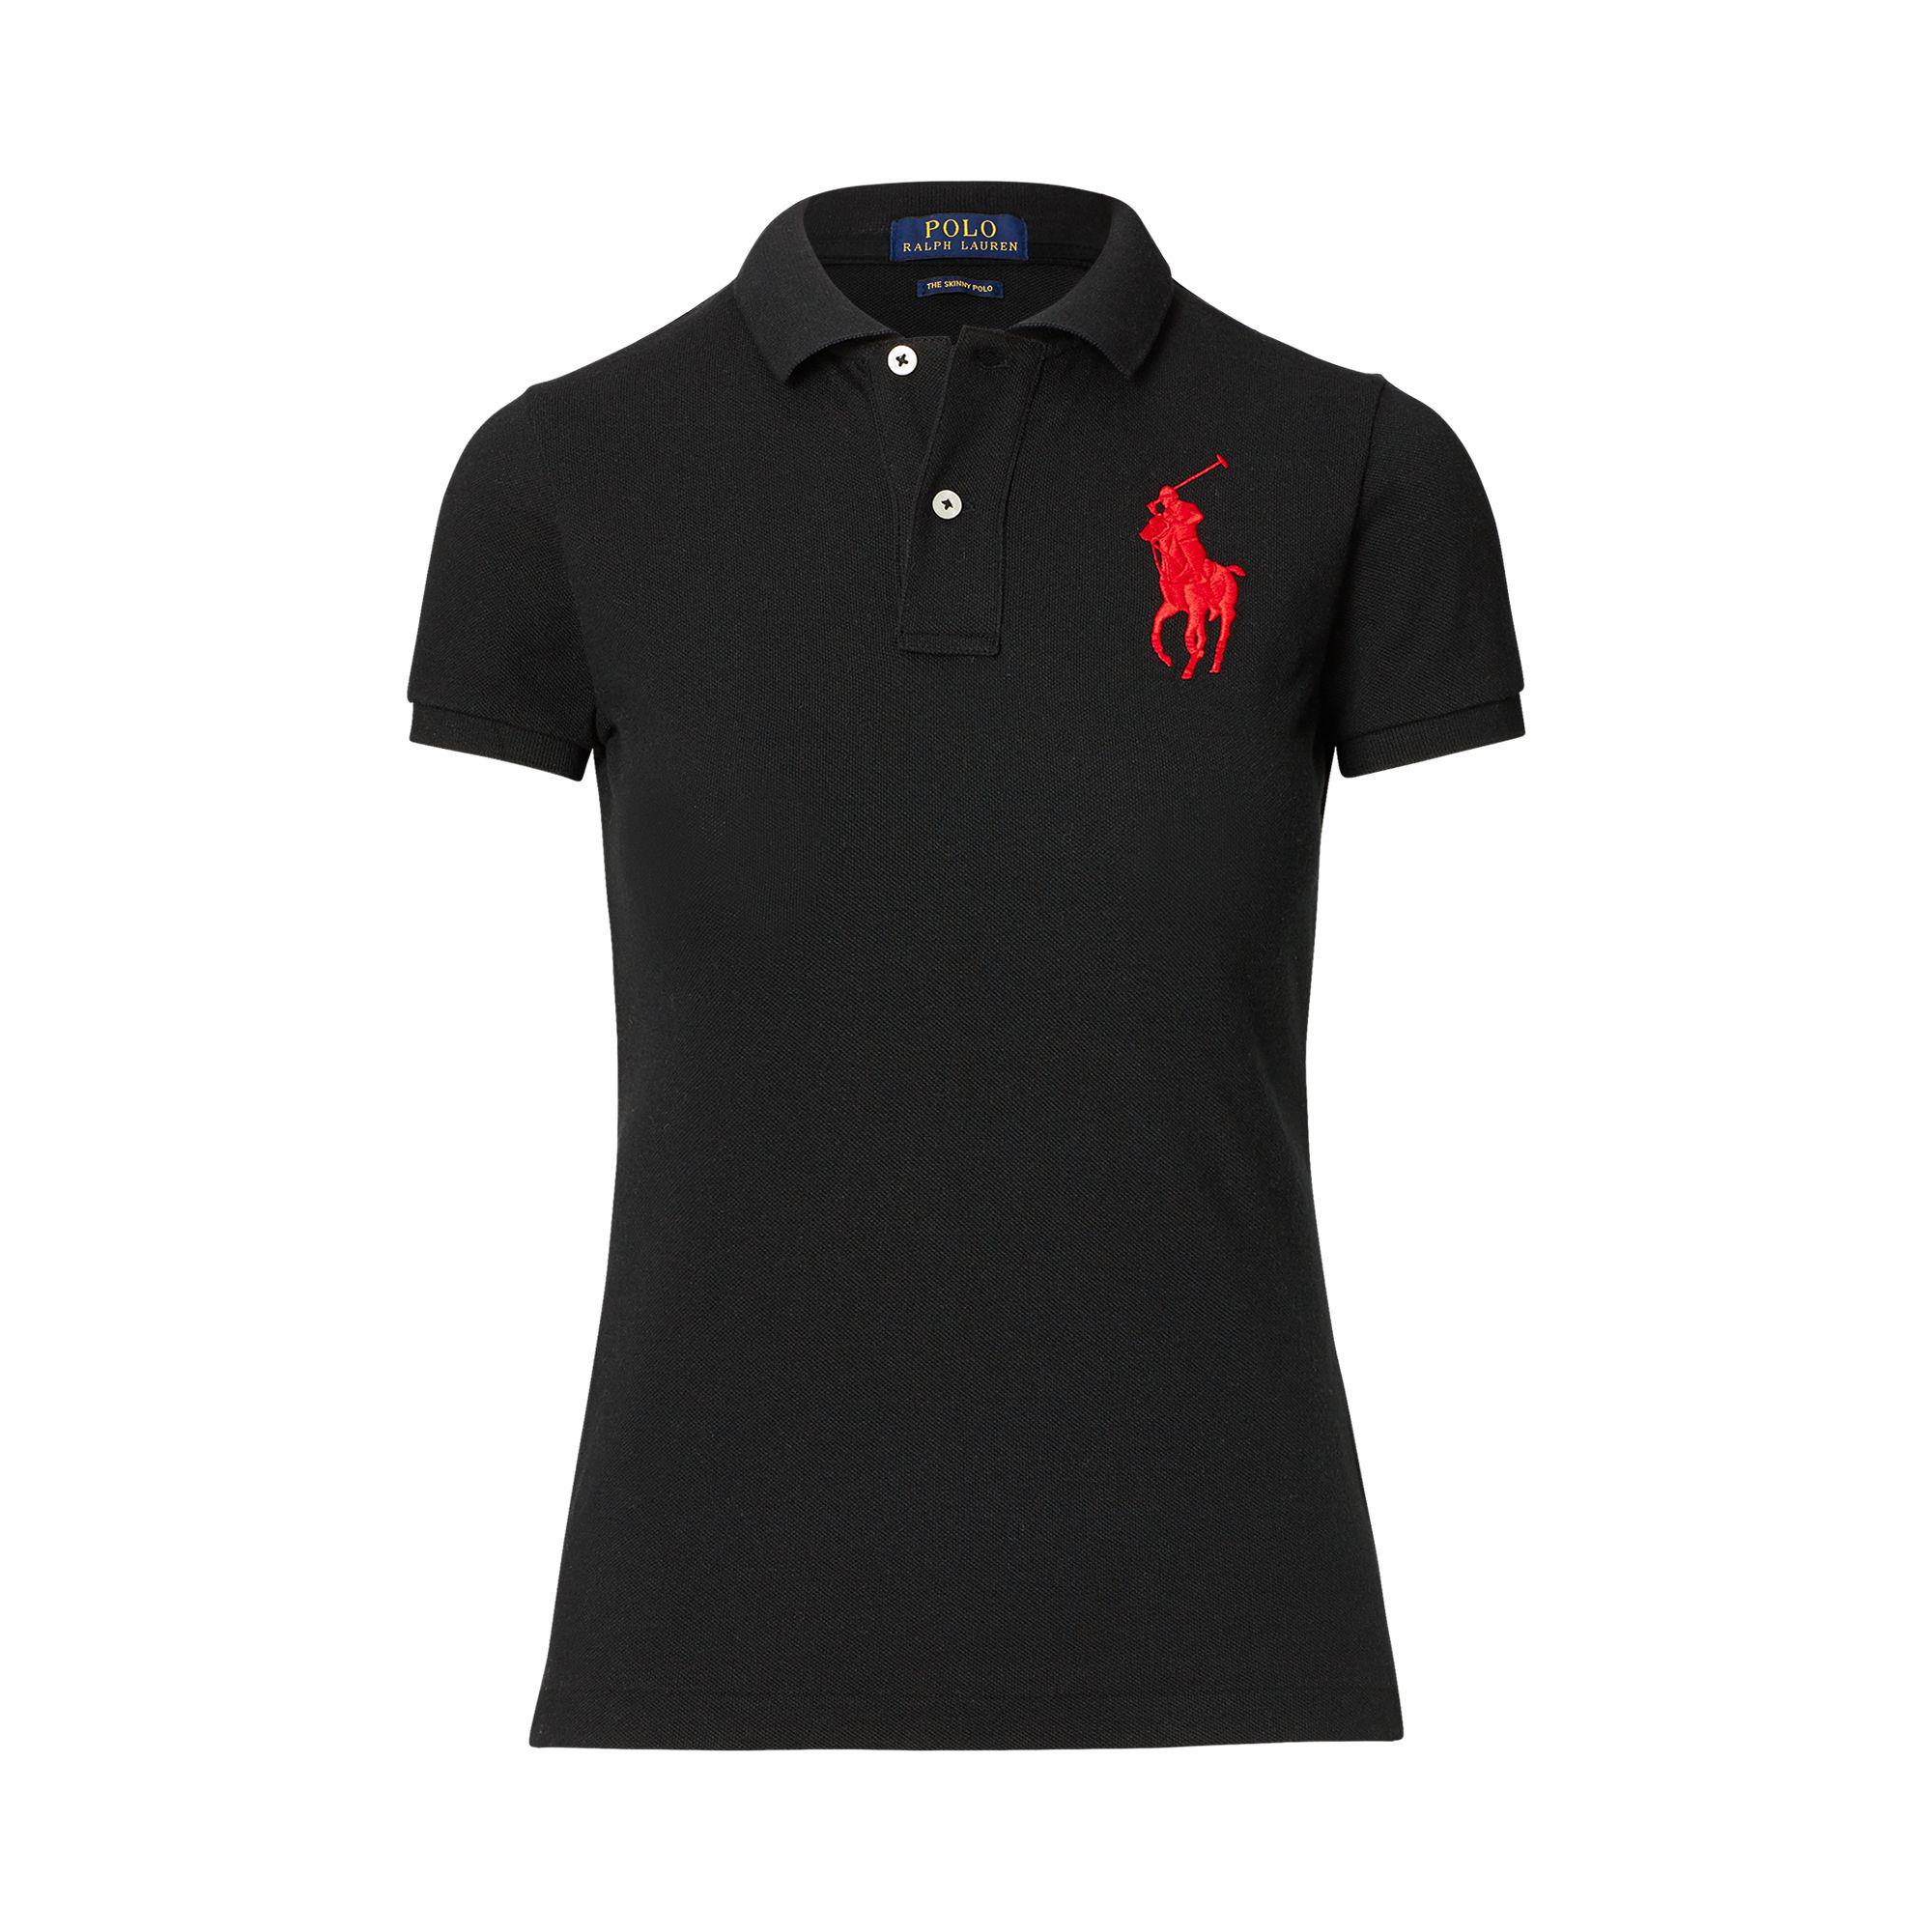 Polo Ralph Lauren Cotton Skinny Fit Big Pony Polo Shirt in Red - Lyst